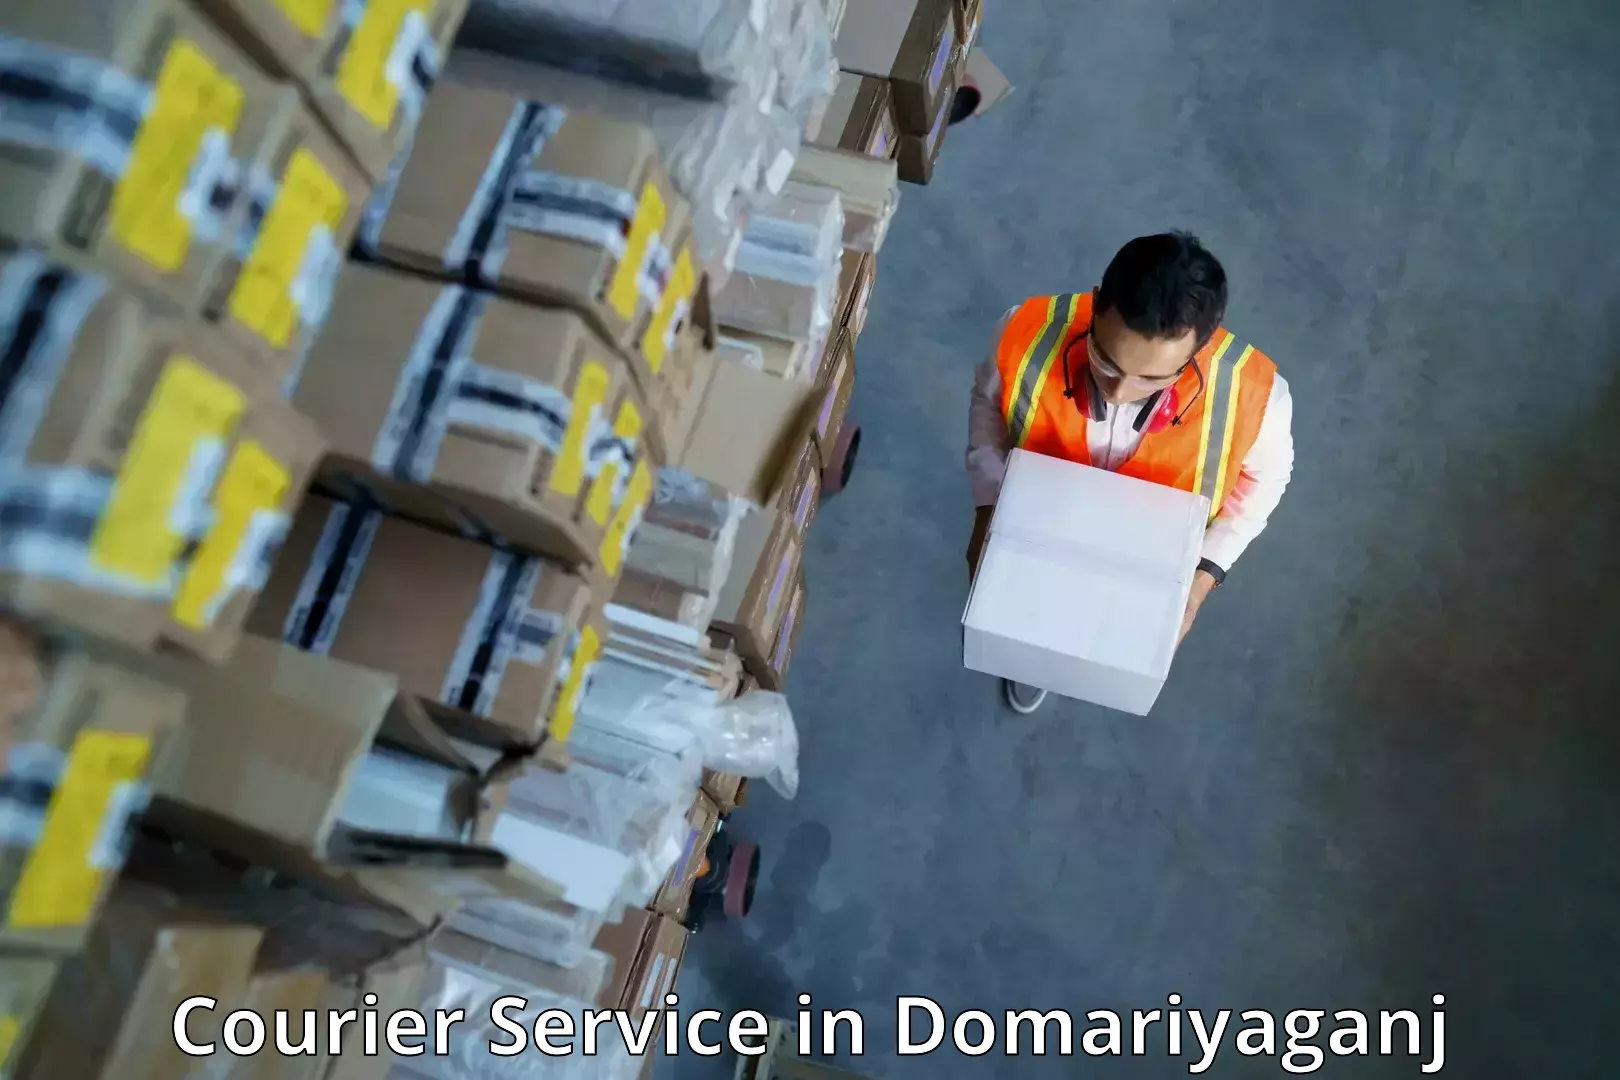 Secure package delivery in Domariyaganj